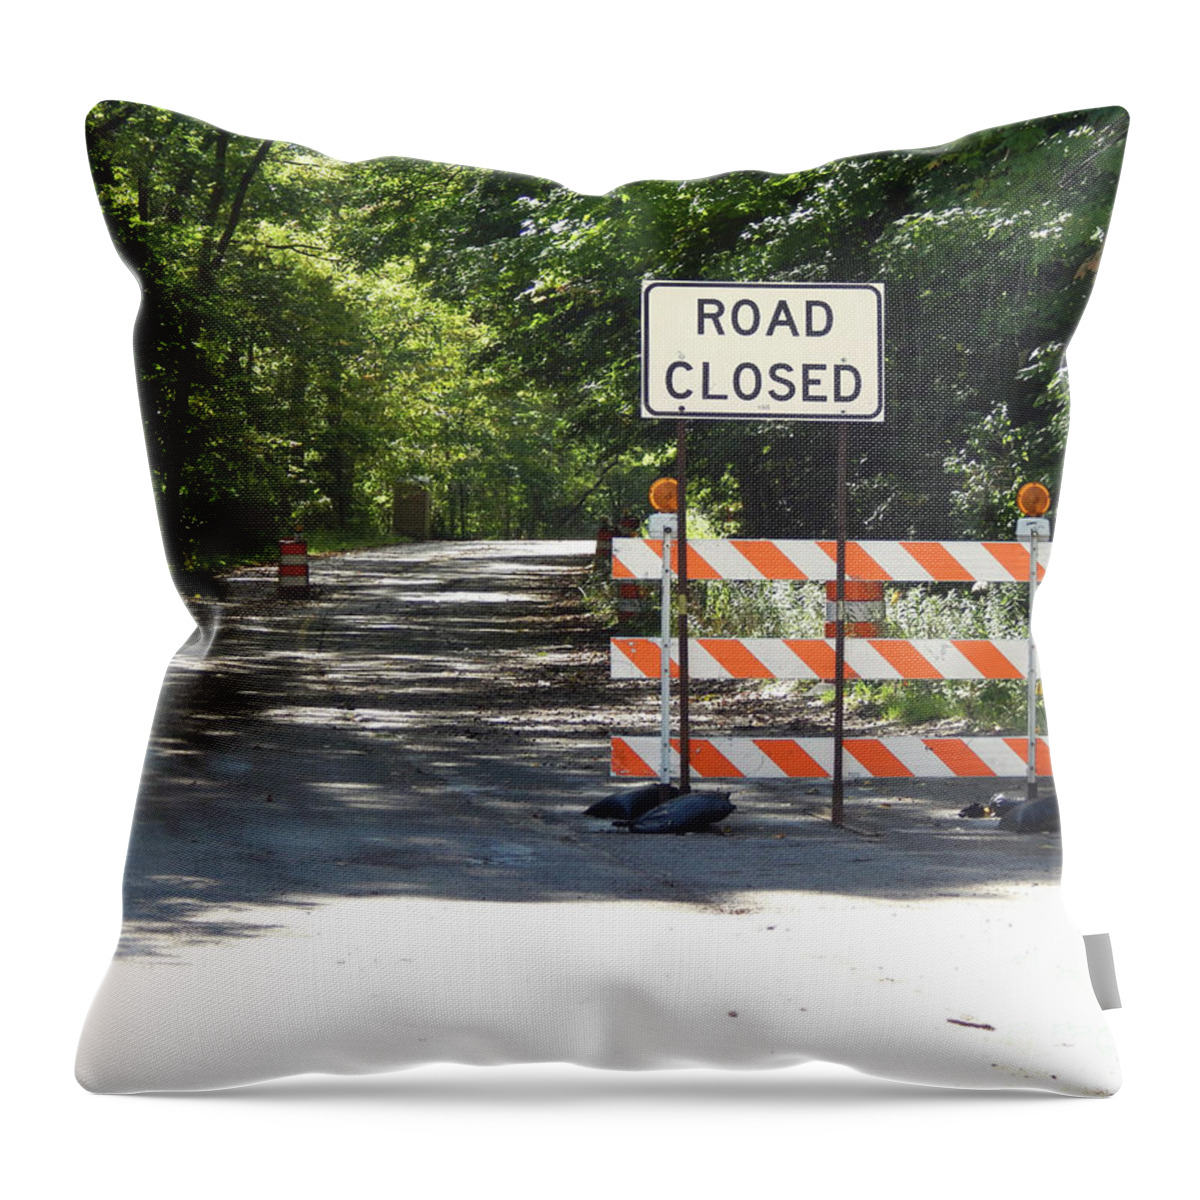 Construction Throw Pillow featuring the photograph Road Closed For Construction by Phil Perkins